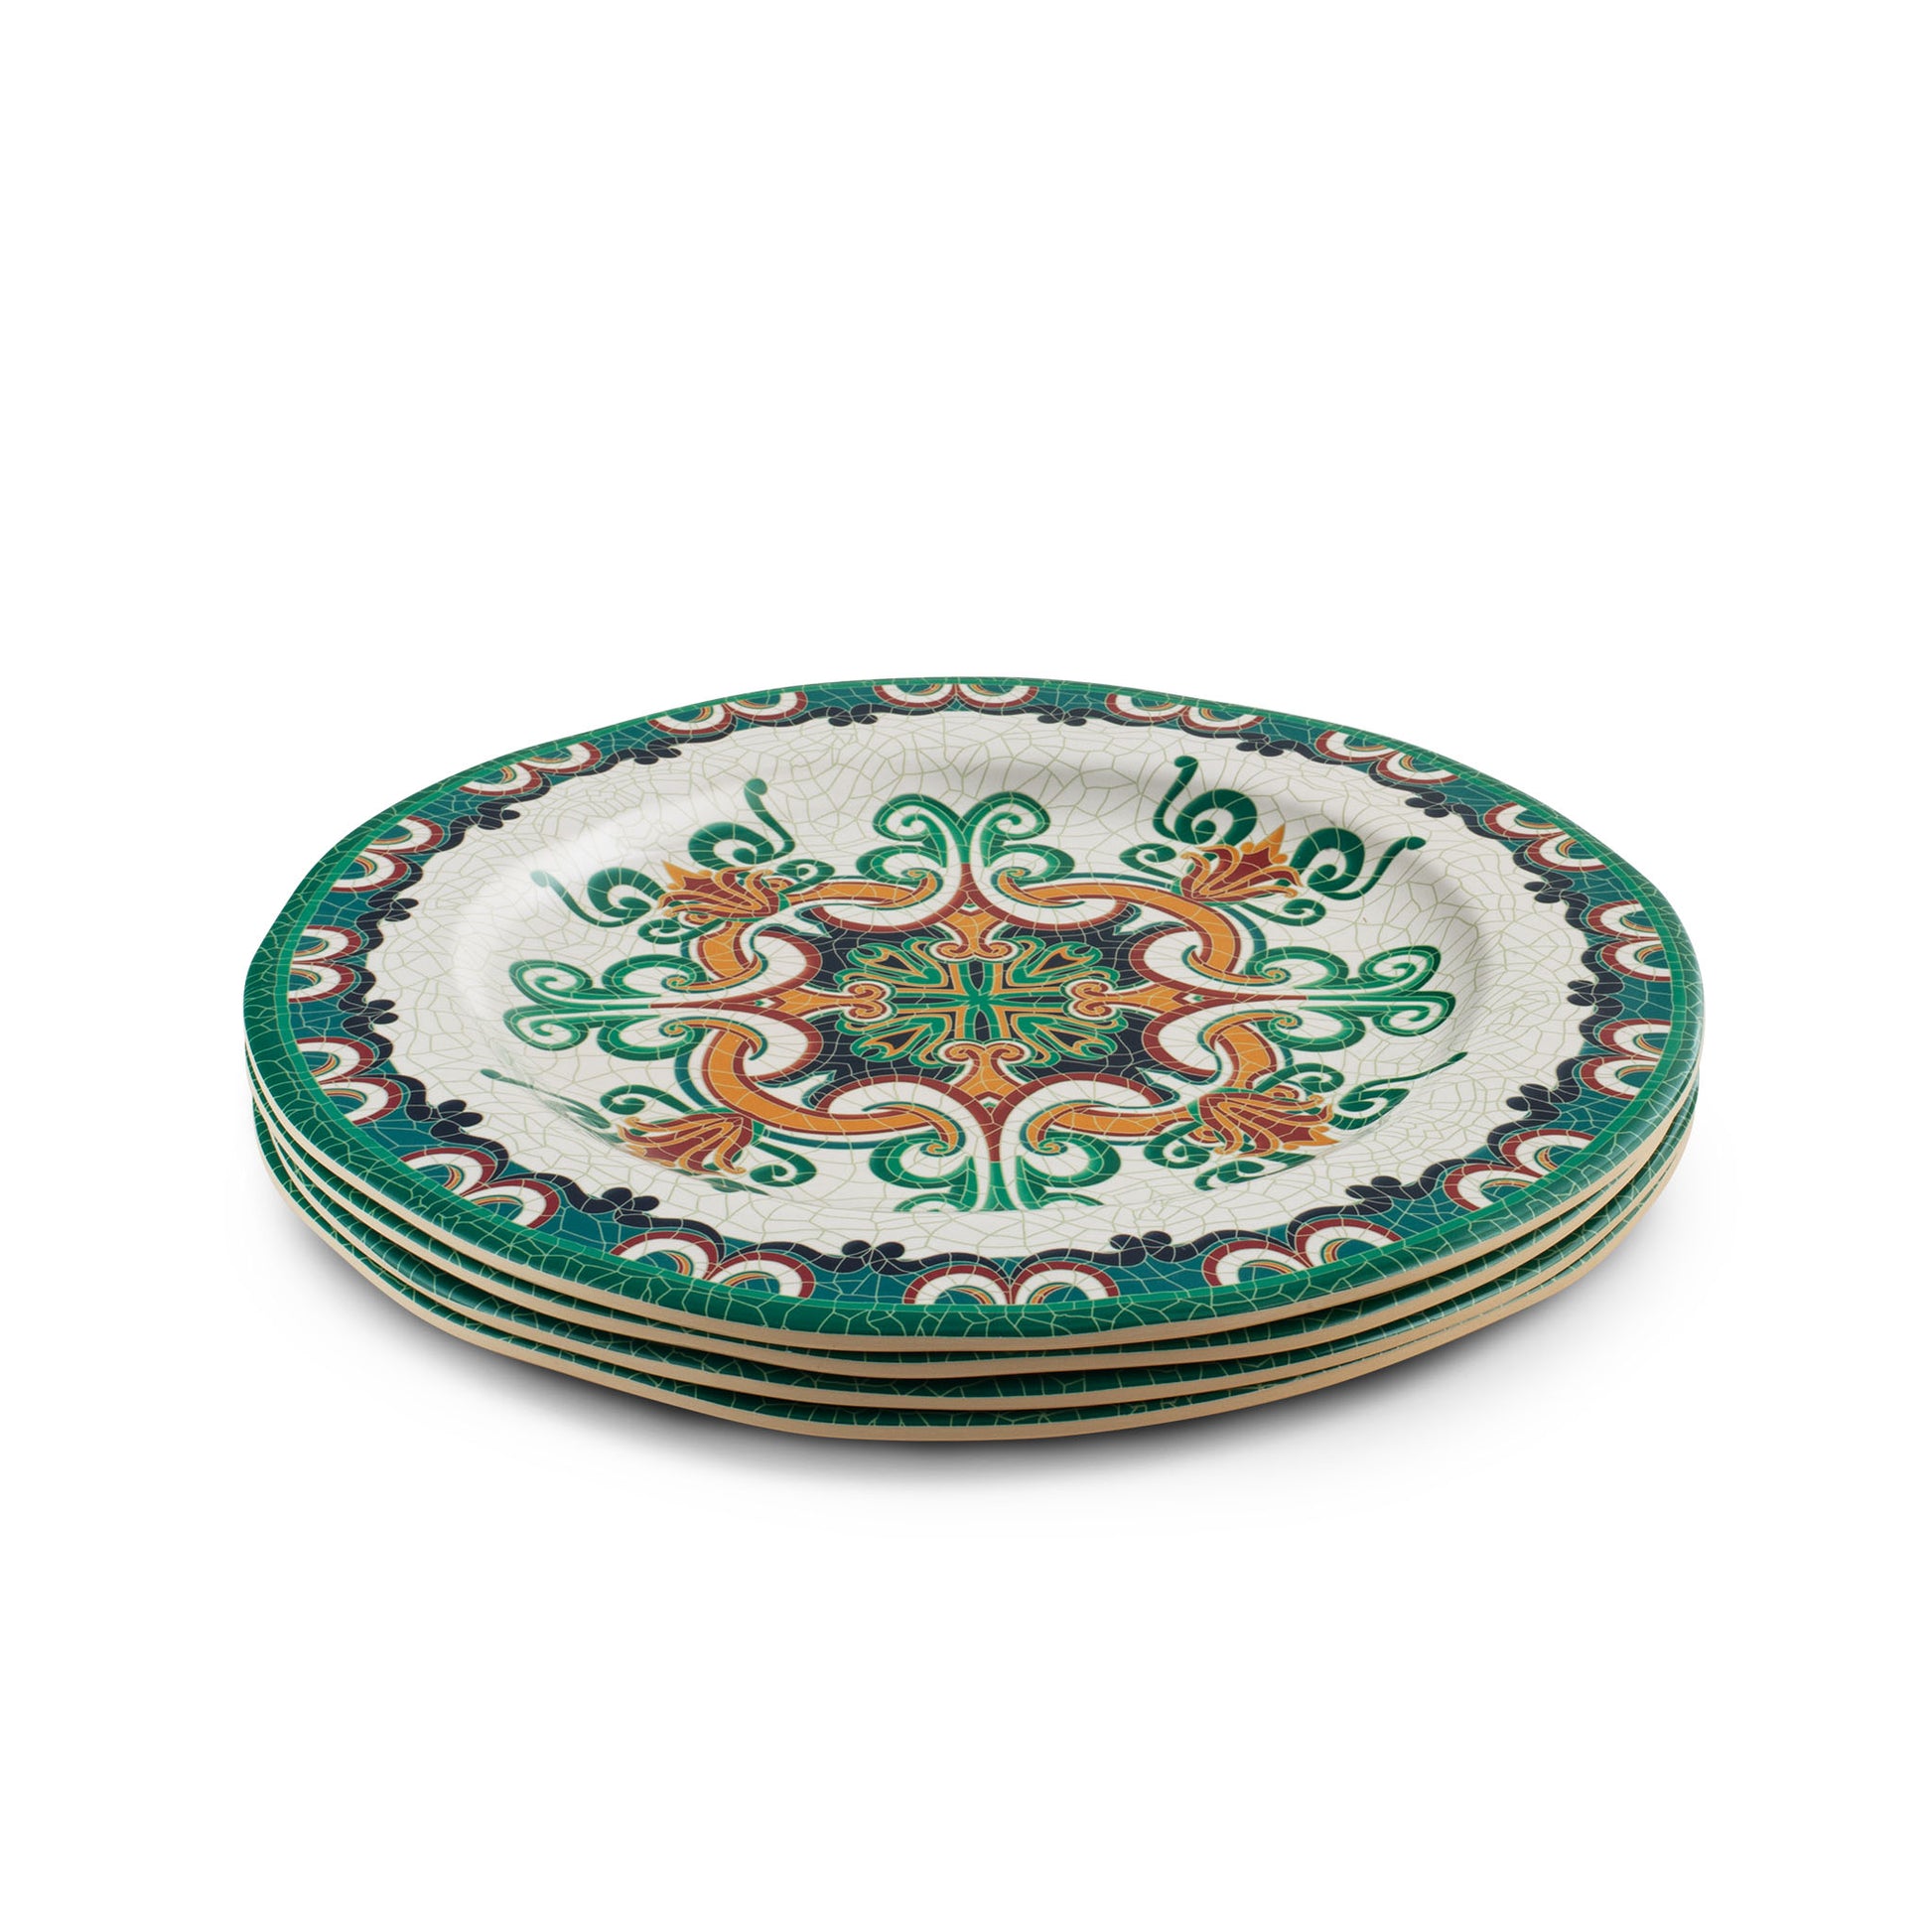 The Plate Story - Rustic Round Plate 11" - Cabana ( Set of 4 )